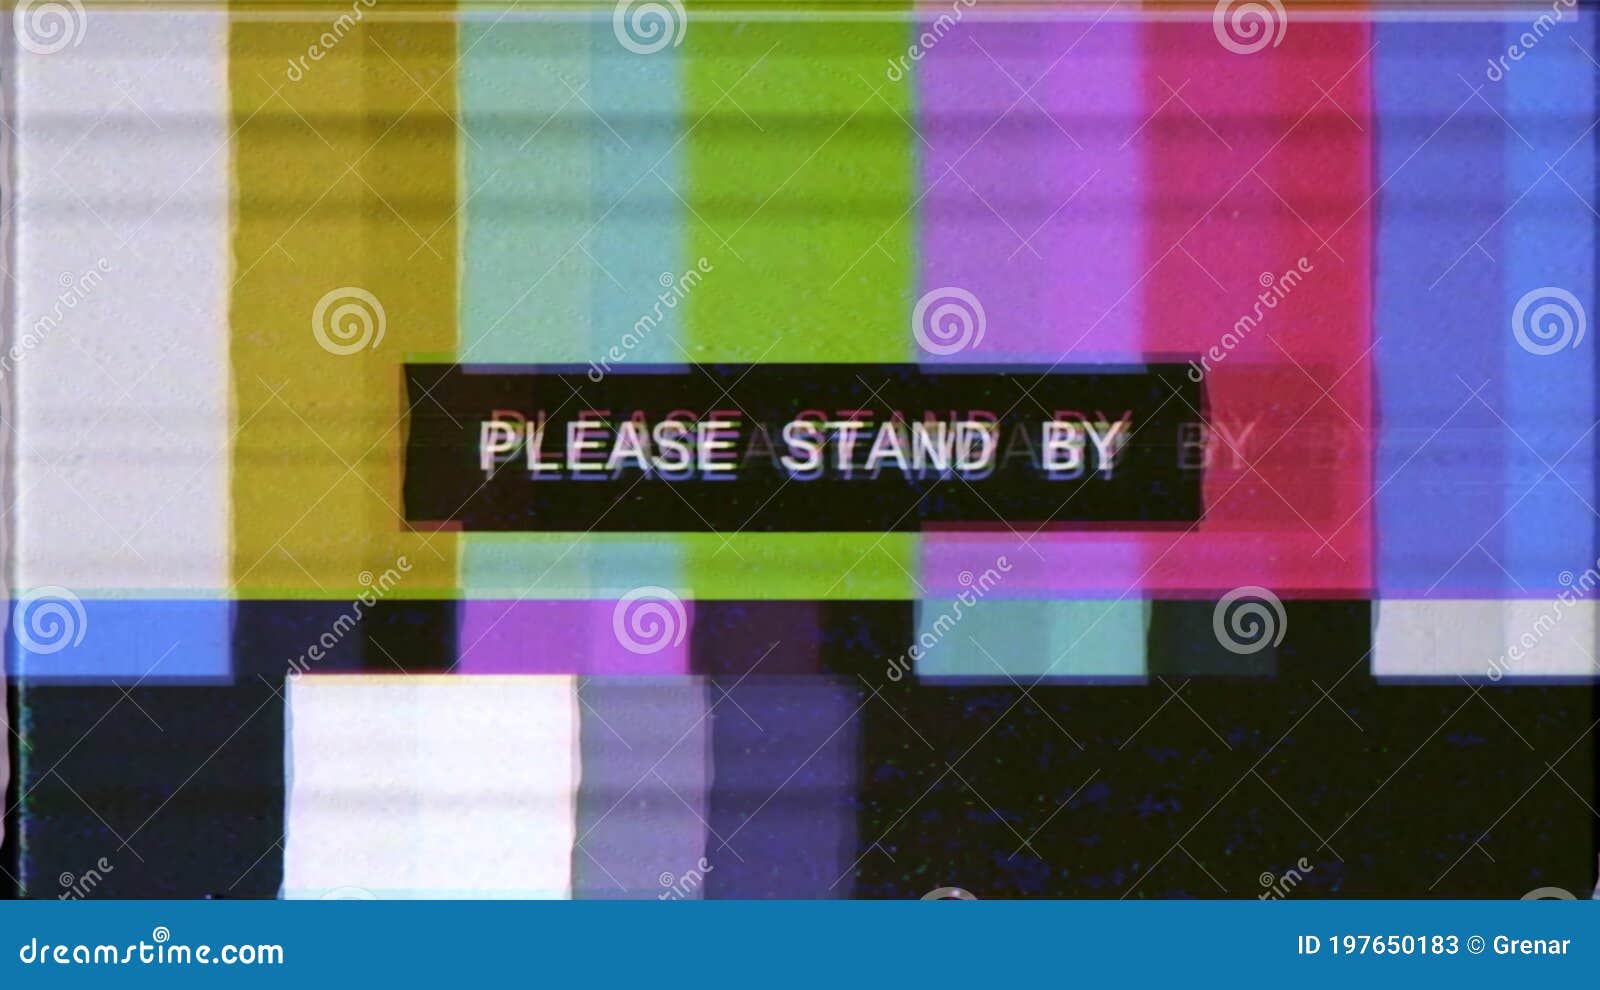 vhs smpte color bars please stand by